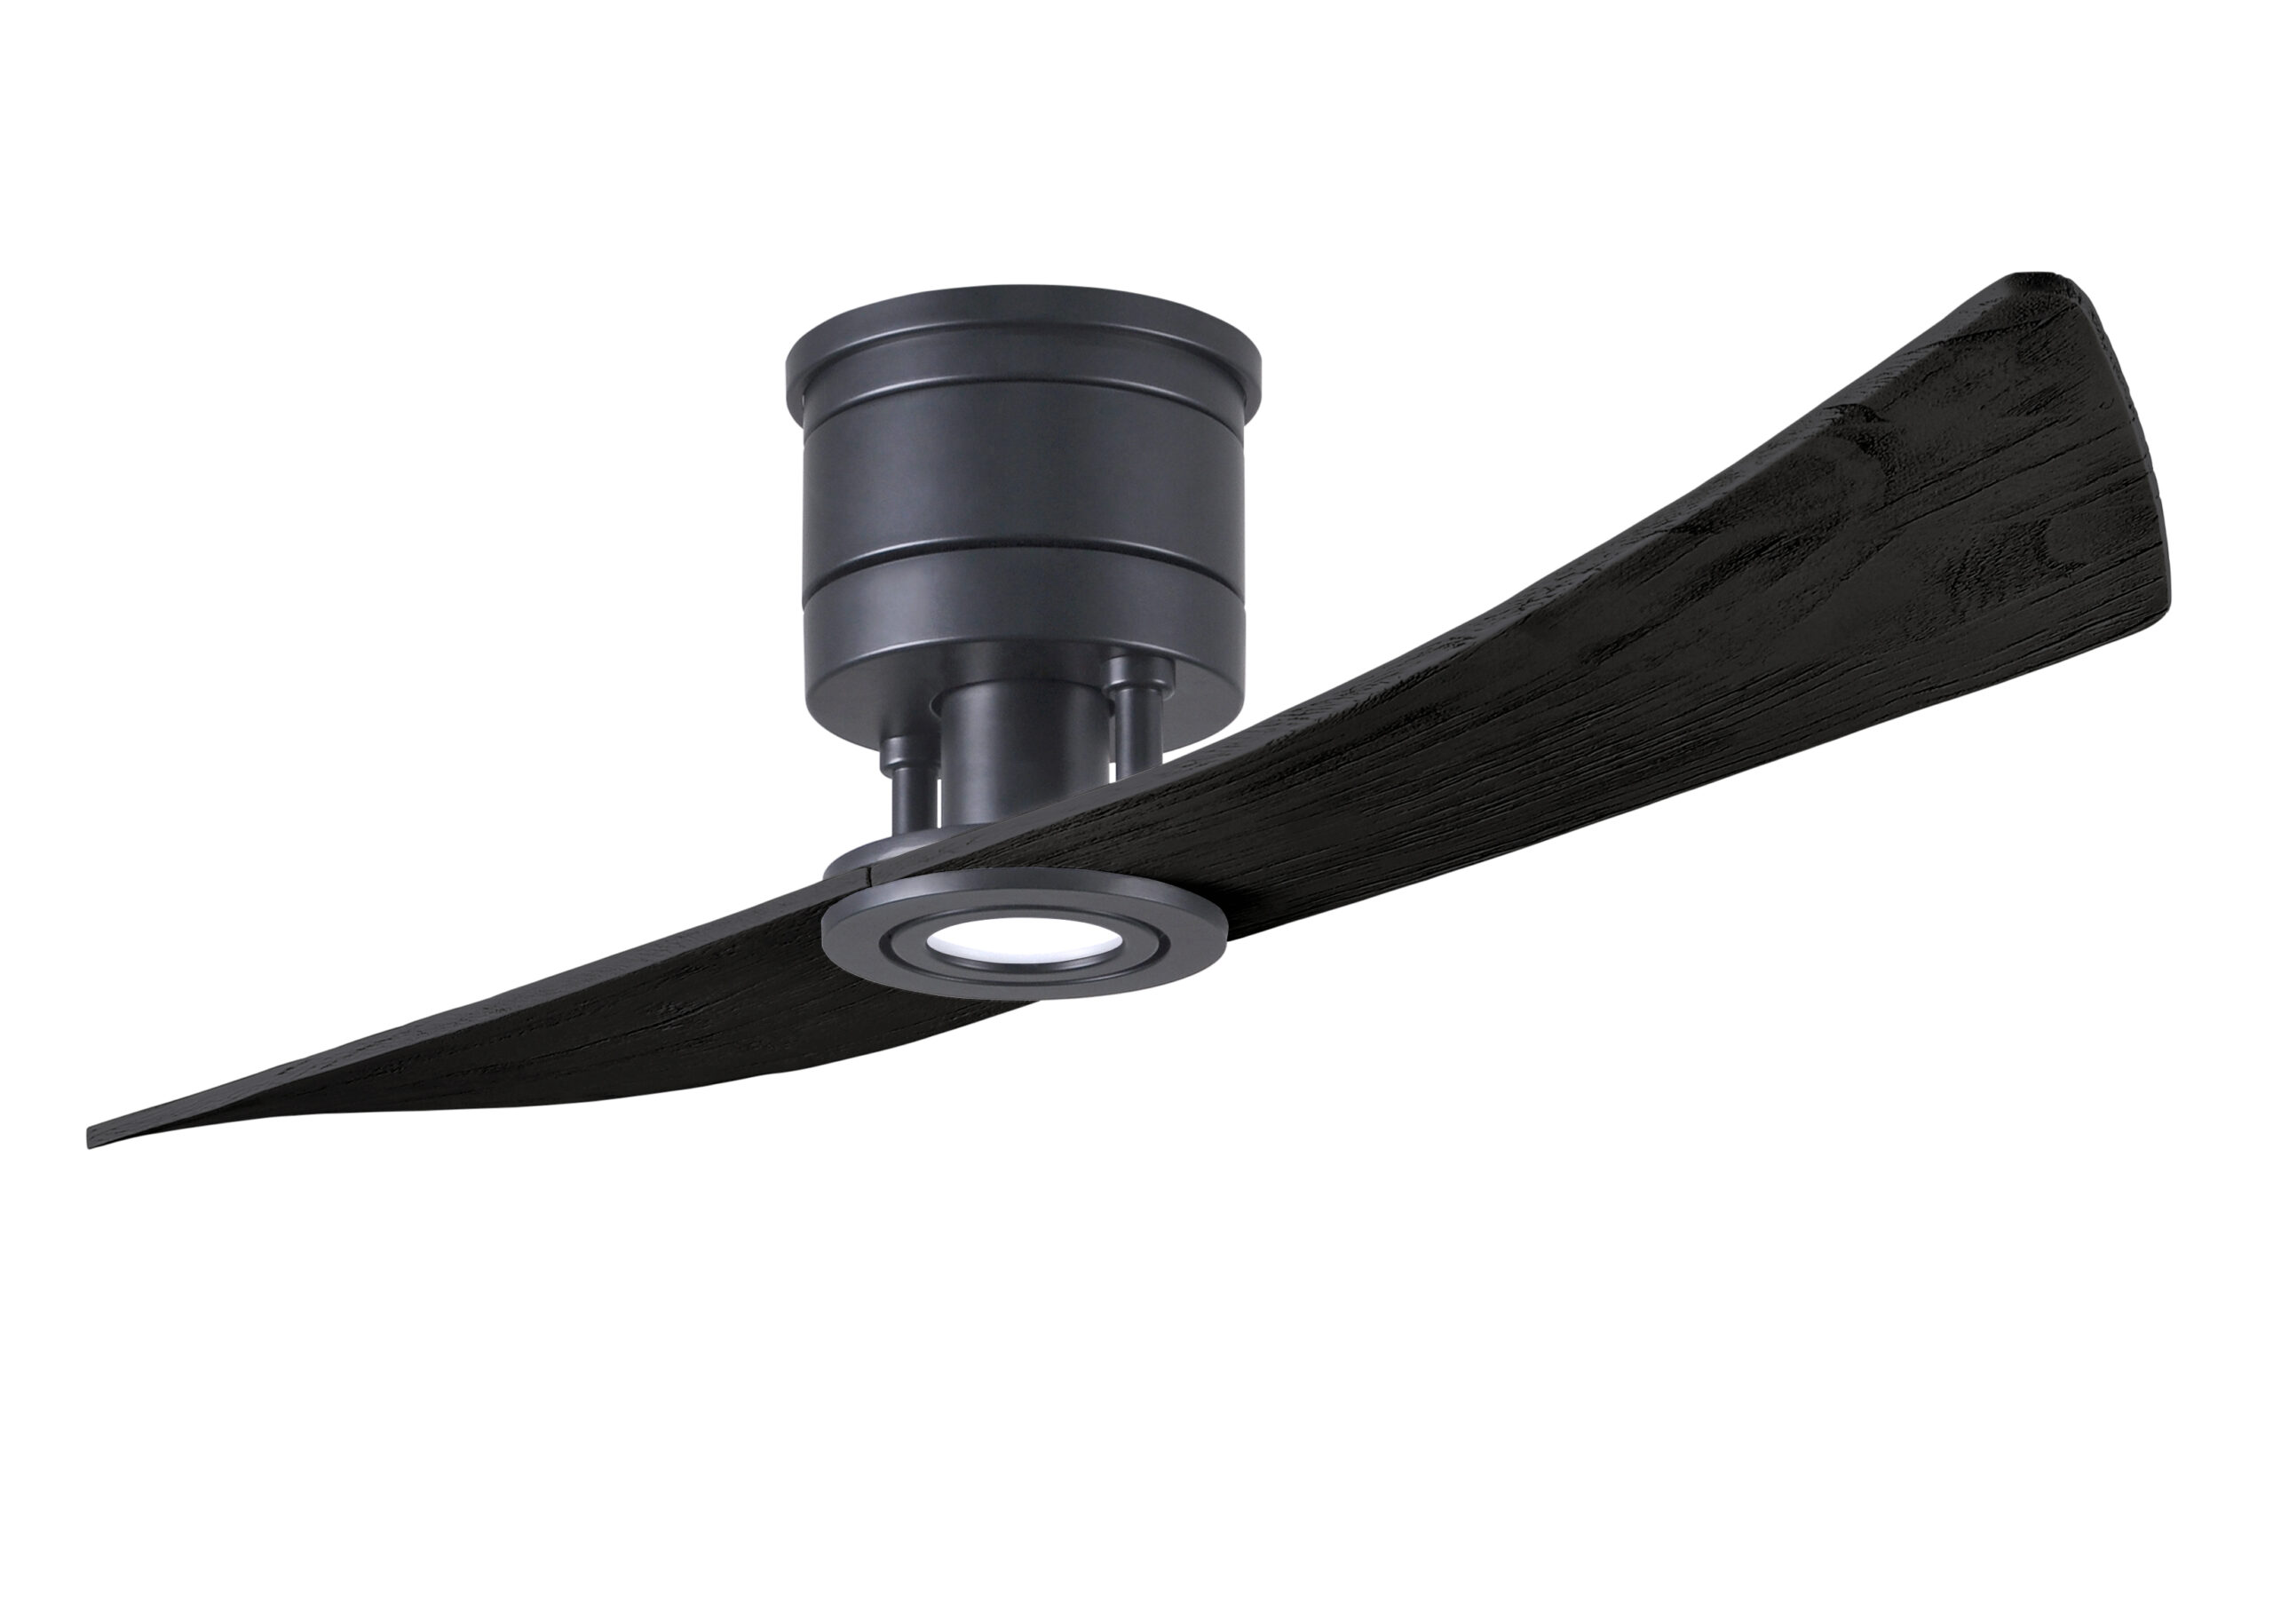 Lindsay 6-speed ceiling fan in Matte Black finish with 52